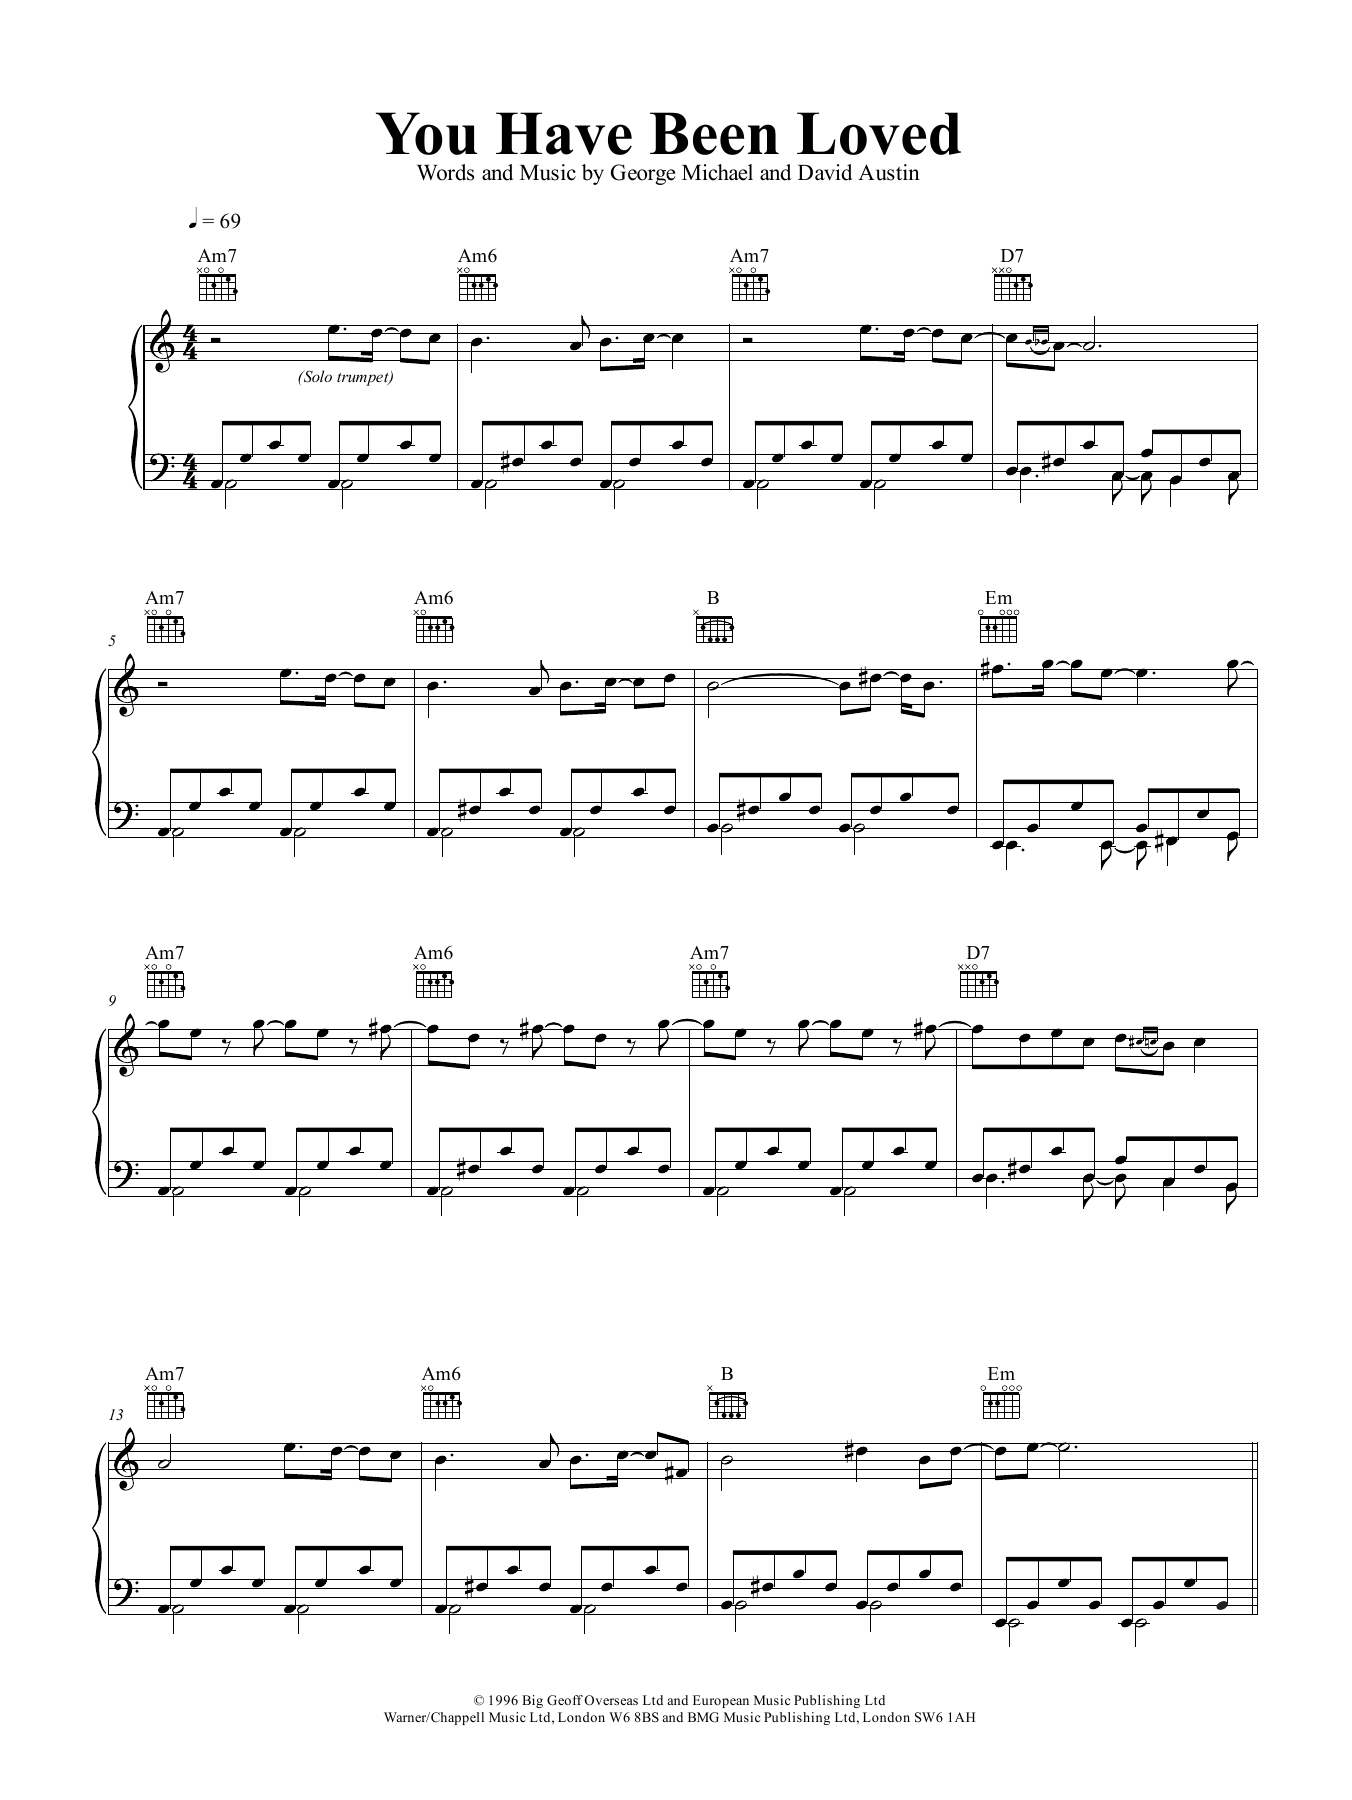 Download George Michael You Have Been Loved Sheet Music